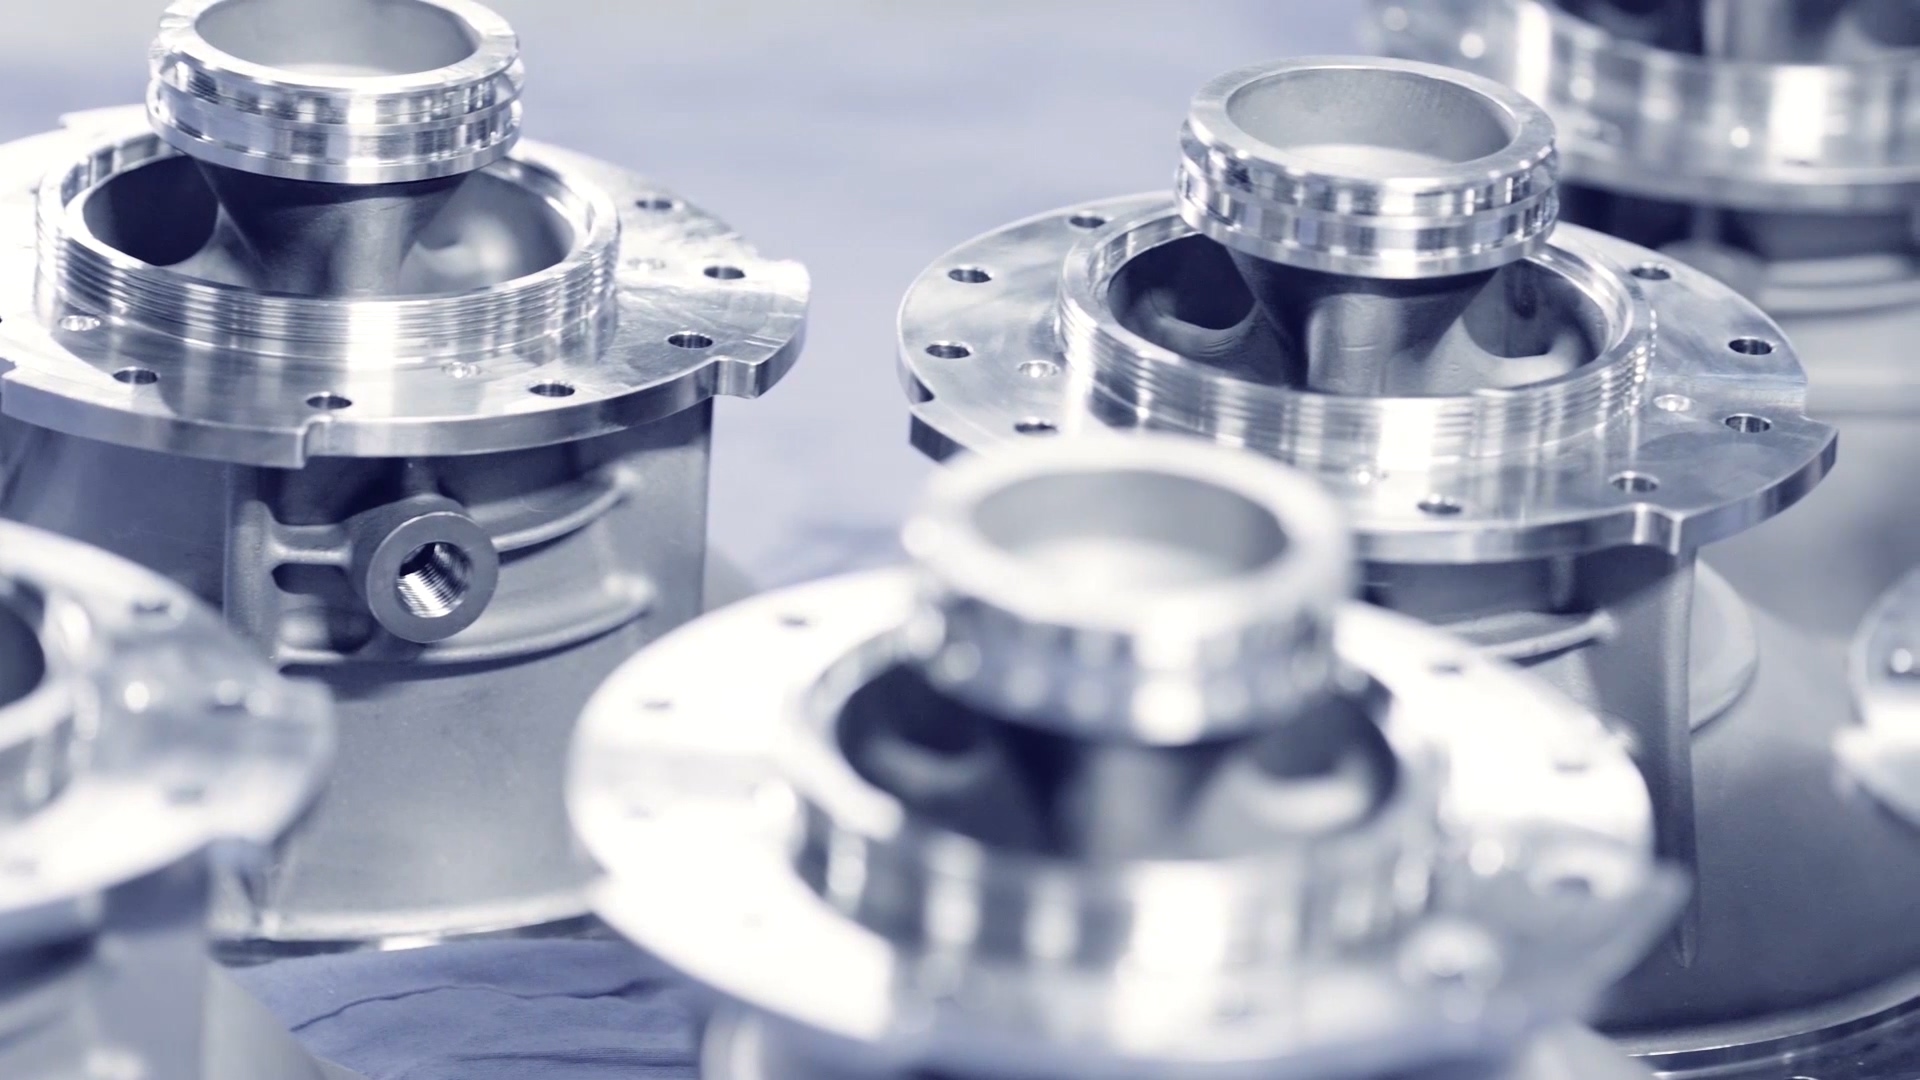 For better part accuracy, count on Burnstein Von Seelen precision casting company